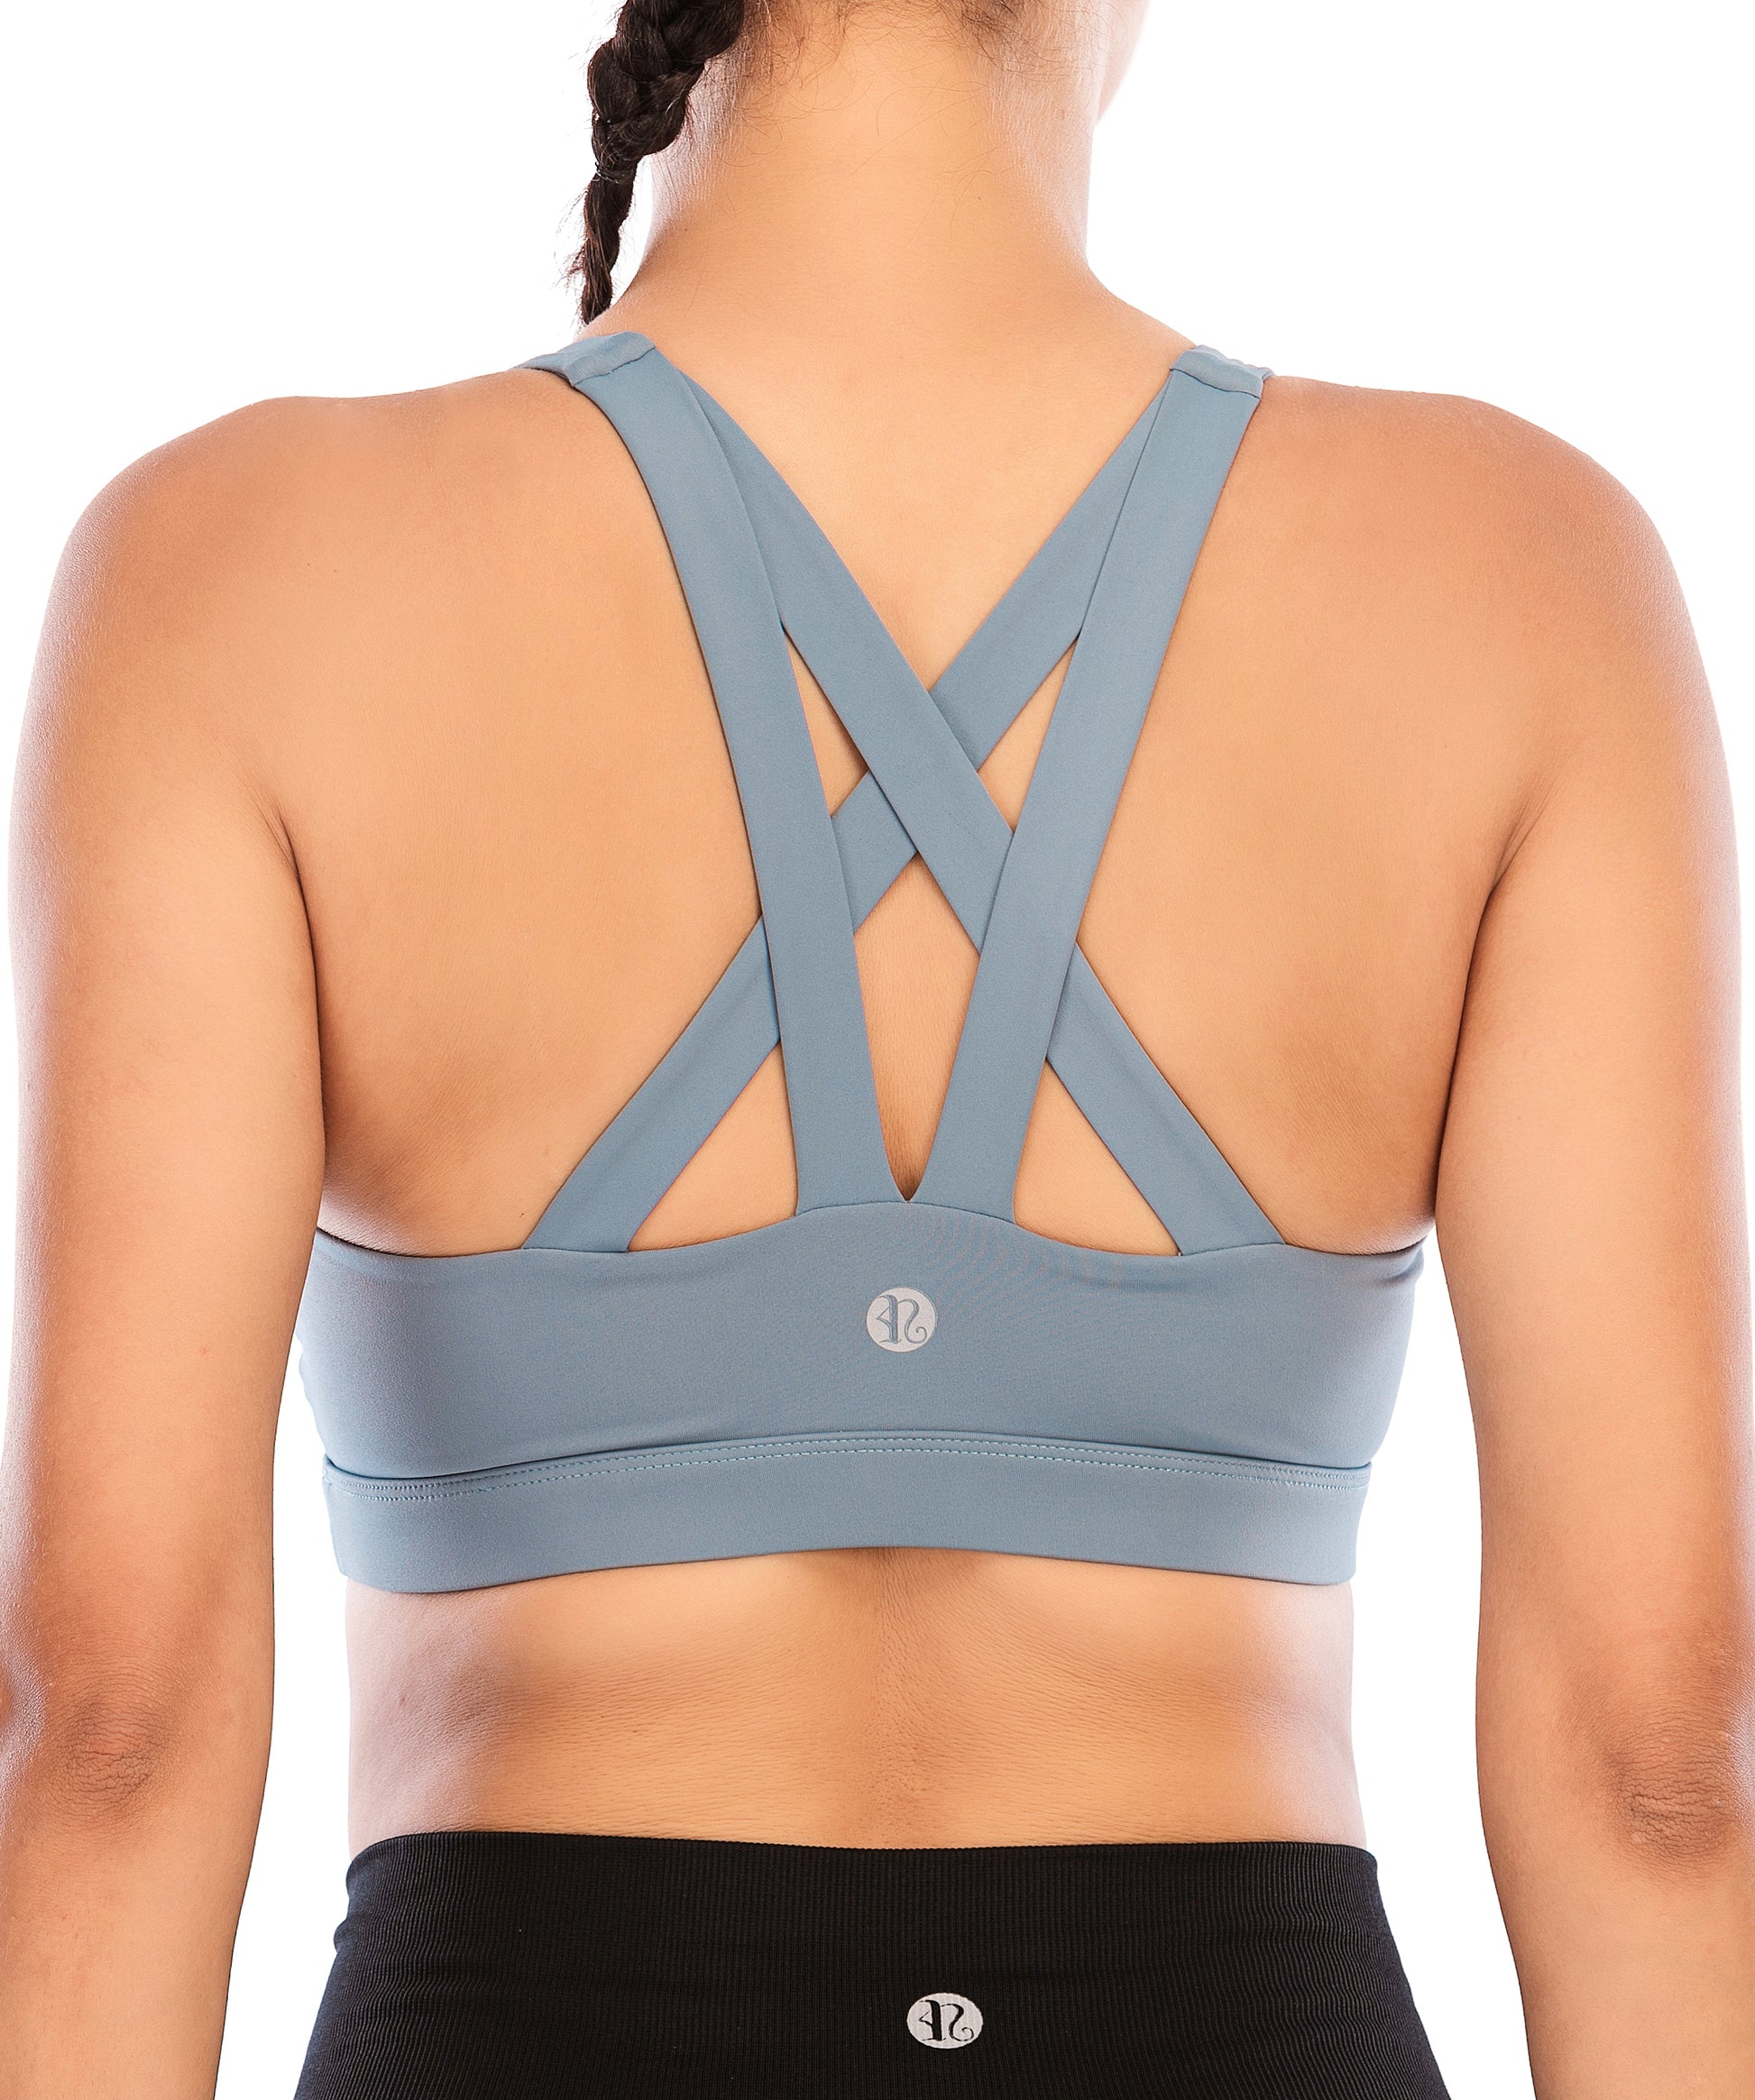 Buy RUNNING GIRL Sports Bra for Women, Criss-Cross Back Padded Strappy  Sports Bras Medium Support Yoga Bra with Removable  Cups(WX2353.Black.CN:L,US:M) at